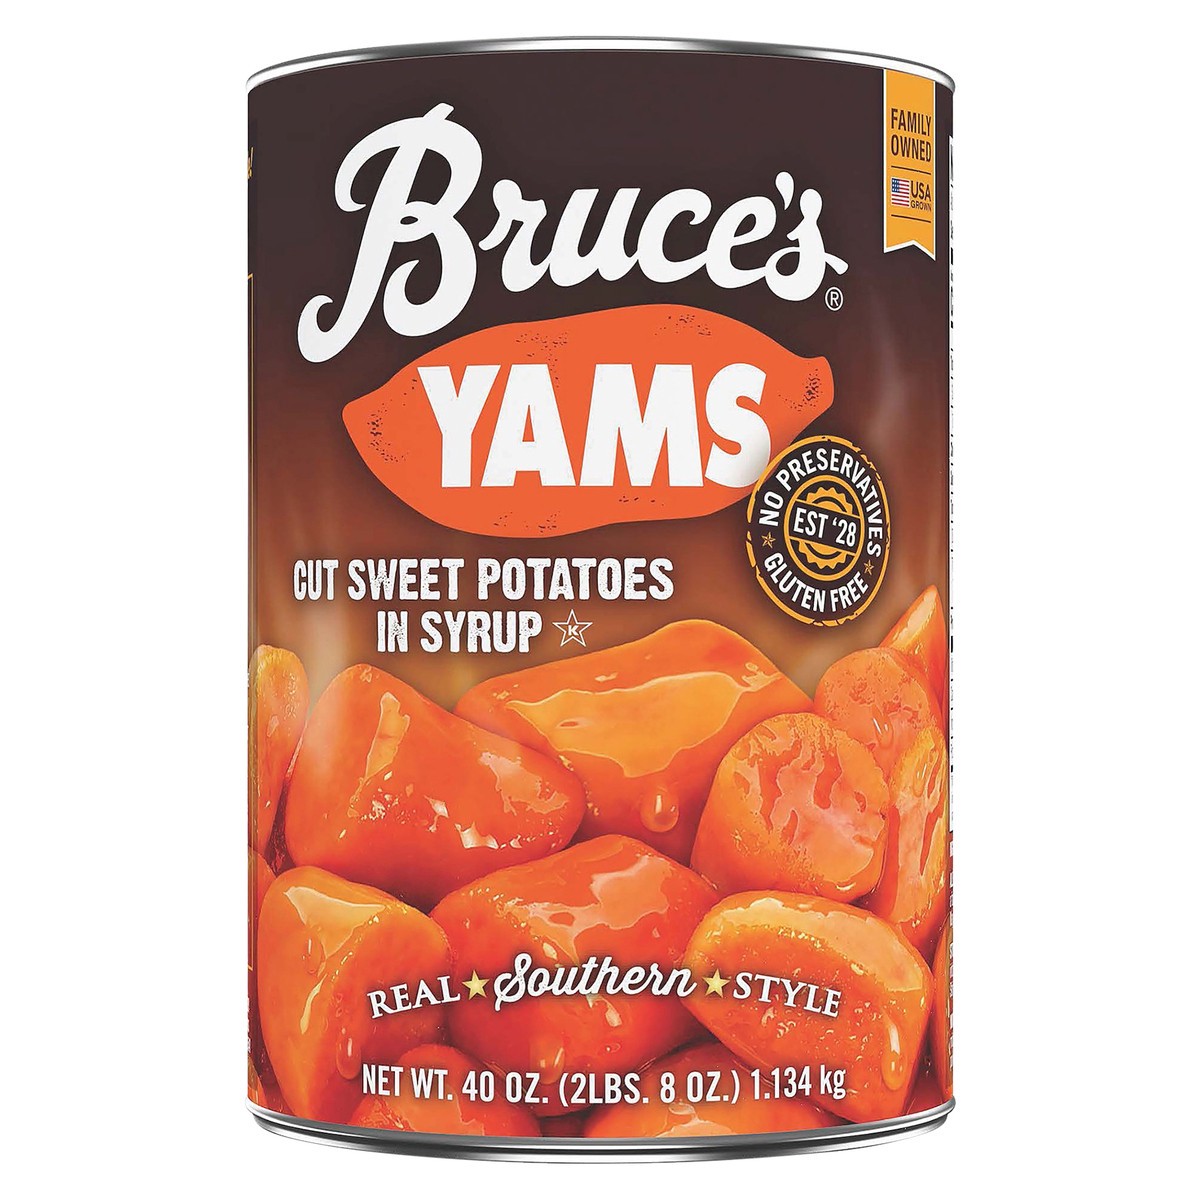 slide 1 of 10, Bruce's Yams Cut Sweet Potatoes in Syrup, 40 oz